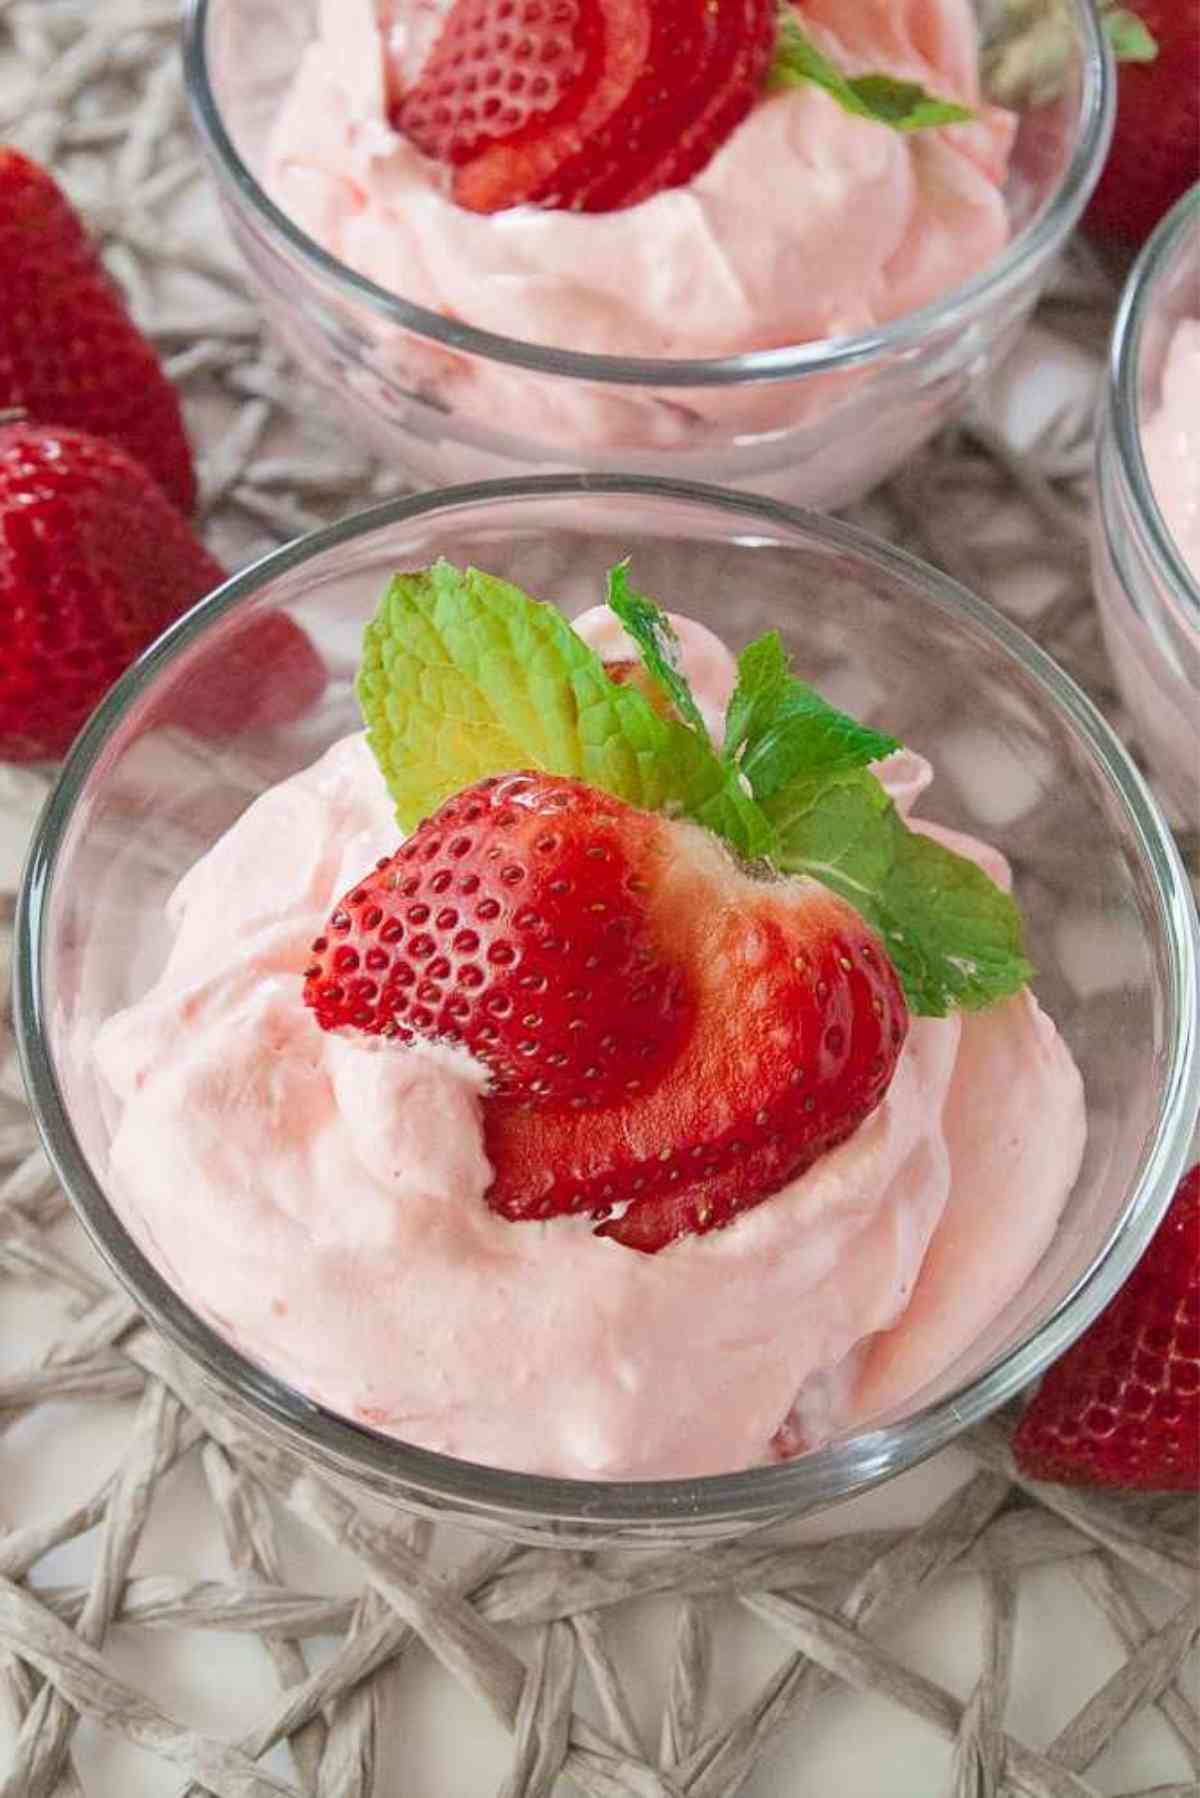 Little bowls of berries and cream jello salad garnished with fresh strawberries.